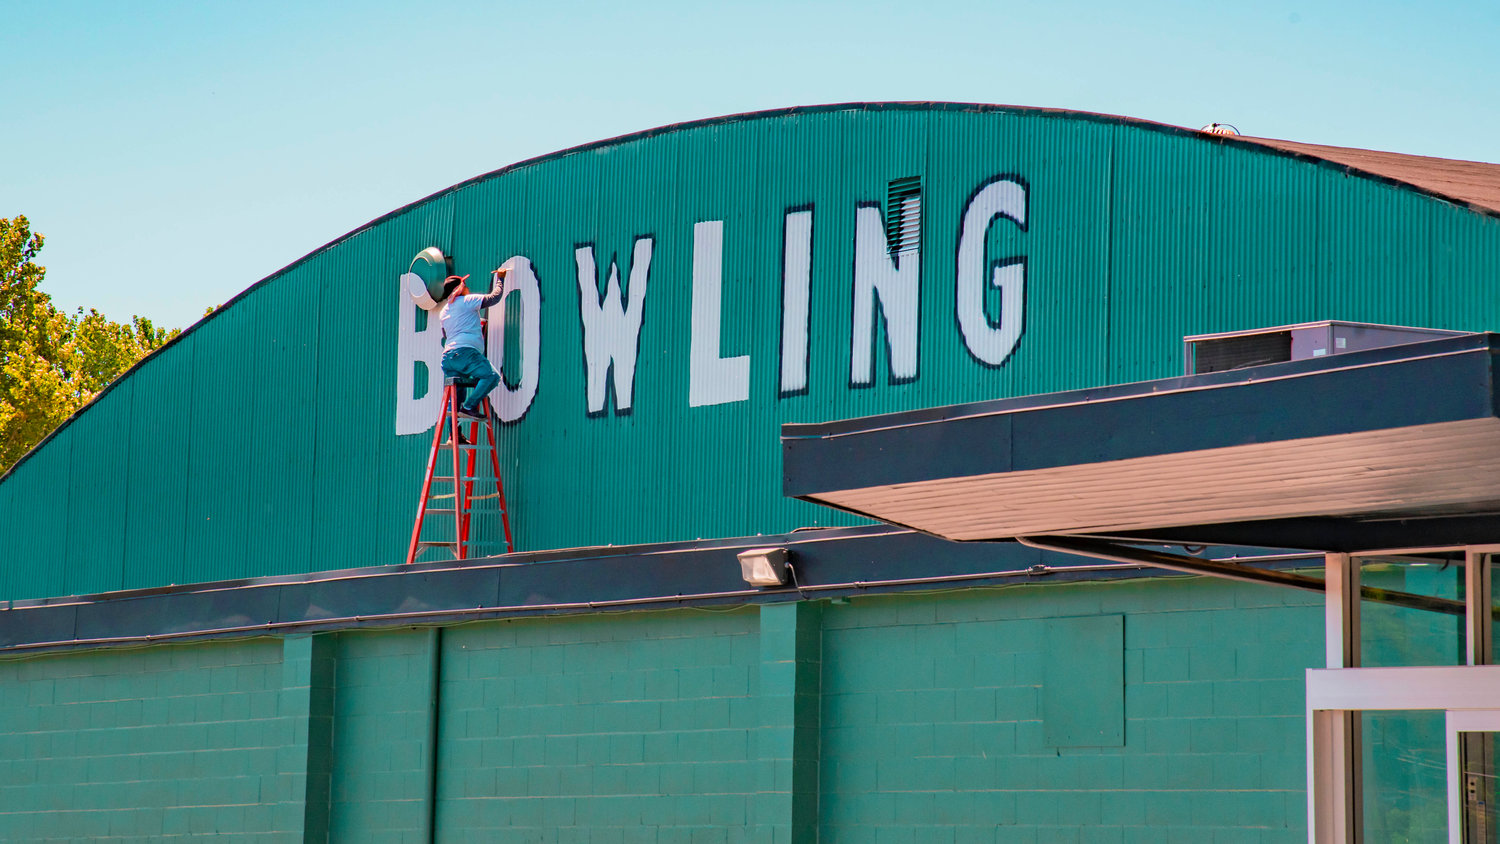 Jared Wenzelburger / jared@chronline.com
The “Bowling” sign is repainted on Tuesday at the Fairway Lanes bowling alley in Centralia. The business closed amid pandemic restrictions in 2020 and has since been sold. Julie and Jeff Walker now hold the keys to the 62-year-old joint. Last month, they wrote on Facebook that the business would reopen soon.  “We are working on getting up and running again soon,” they wrote on May 10.  “Probably going to be sometime this summer.  We are making some changes and updates and we hope to be fully operational for fall leagues. Registration updates will be posted at a later date. Thanks everyone for their patience and let’s get back to bowling.”